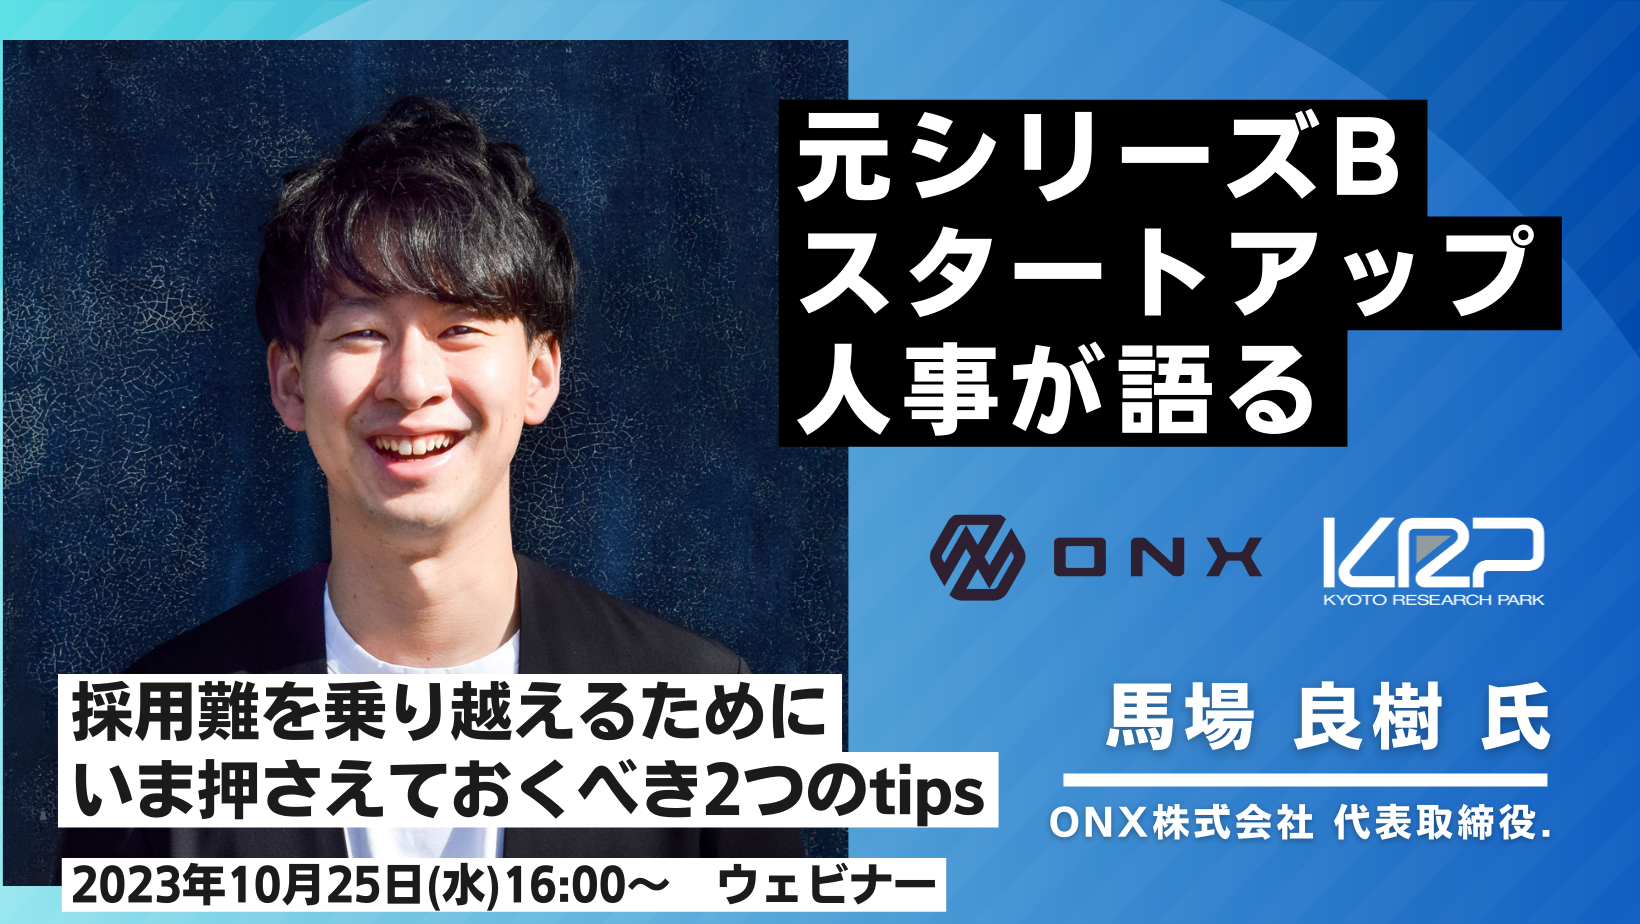 ONXxKRPバナー (Facebook Cover).png